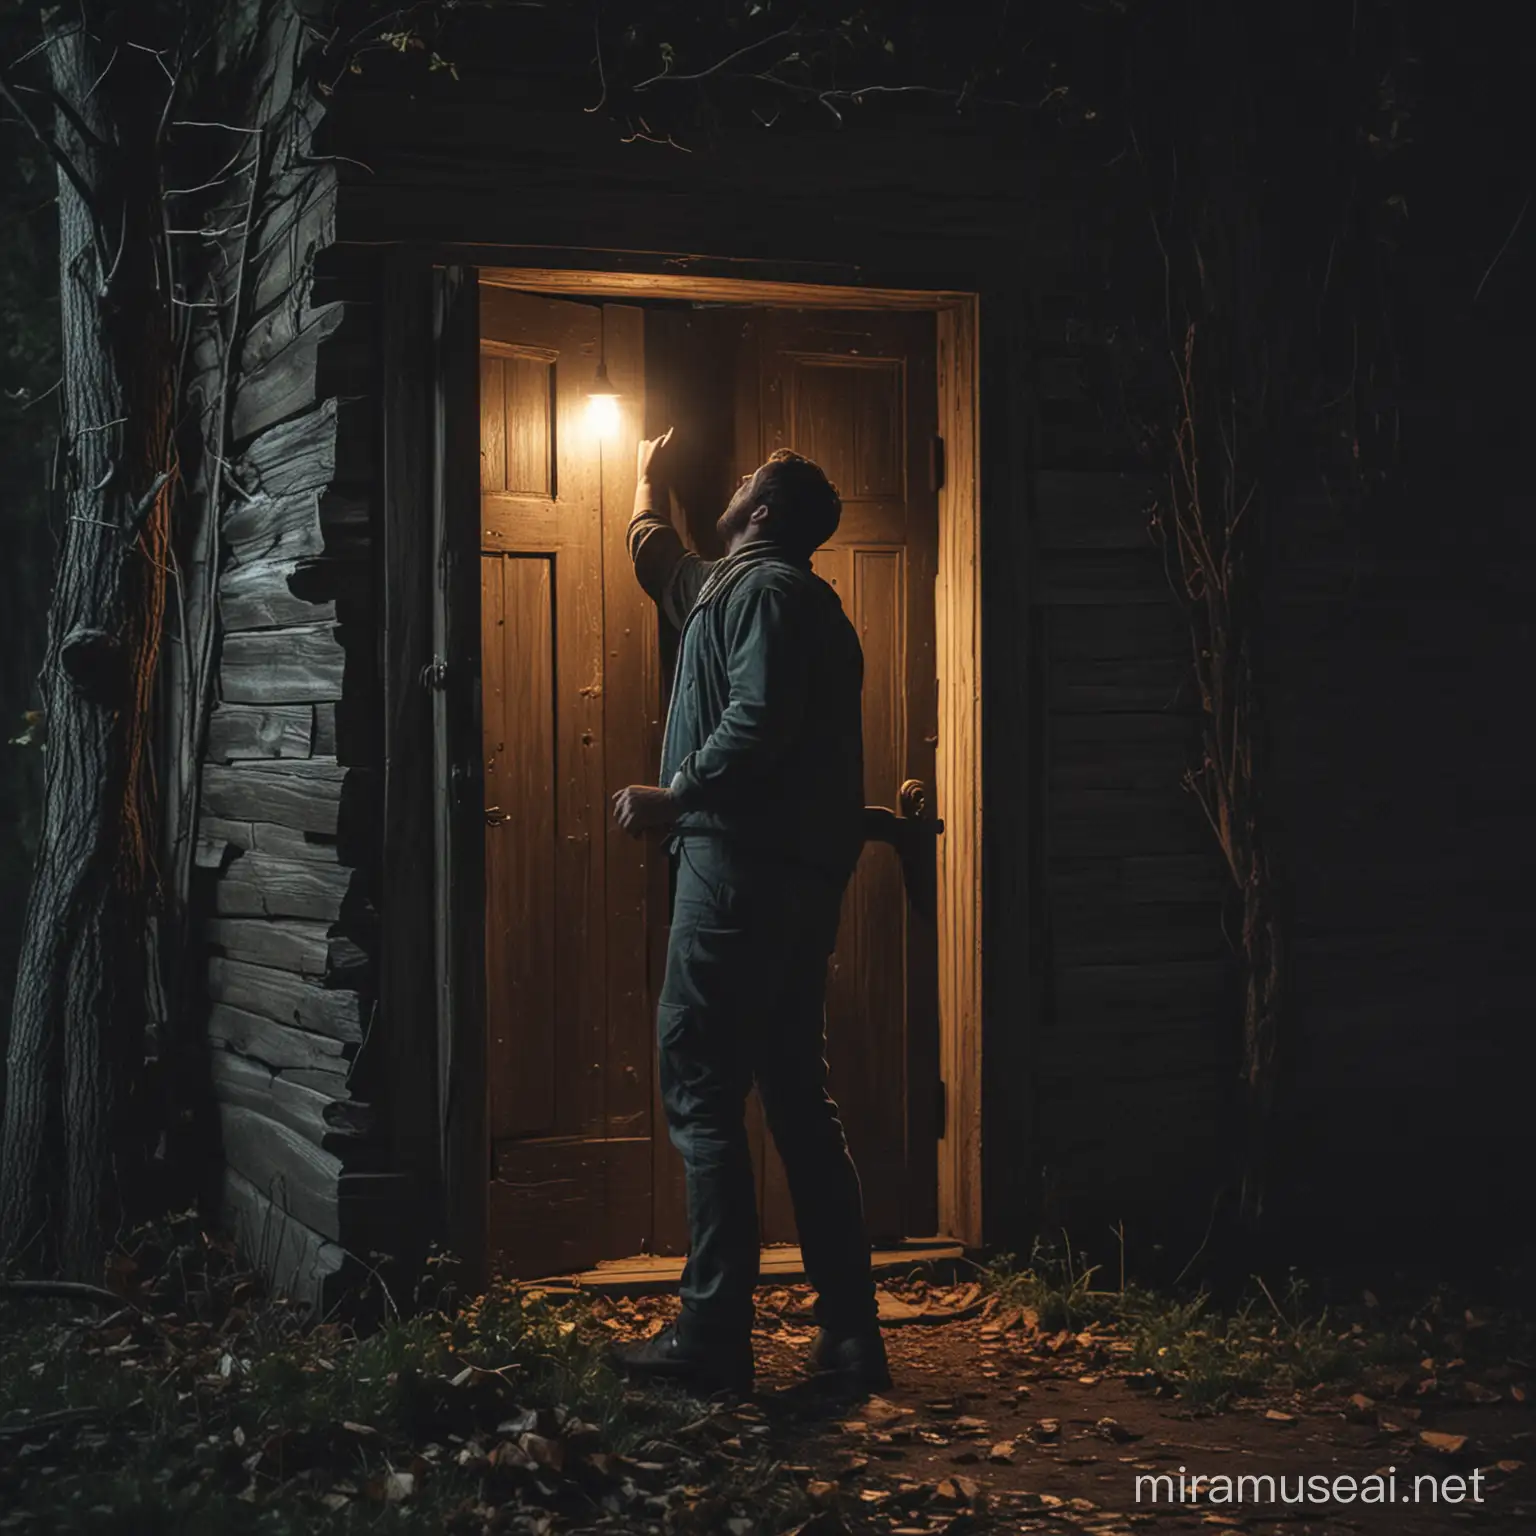 Mysterious Figure Knocking on Door of Abandoned Forest Dwelling at Night